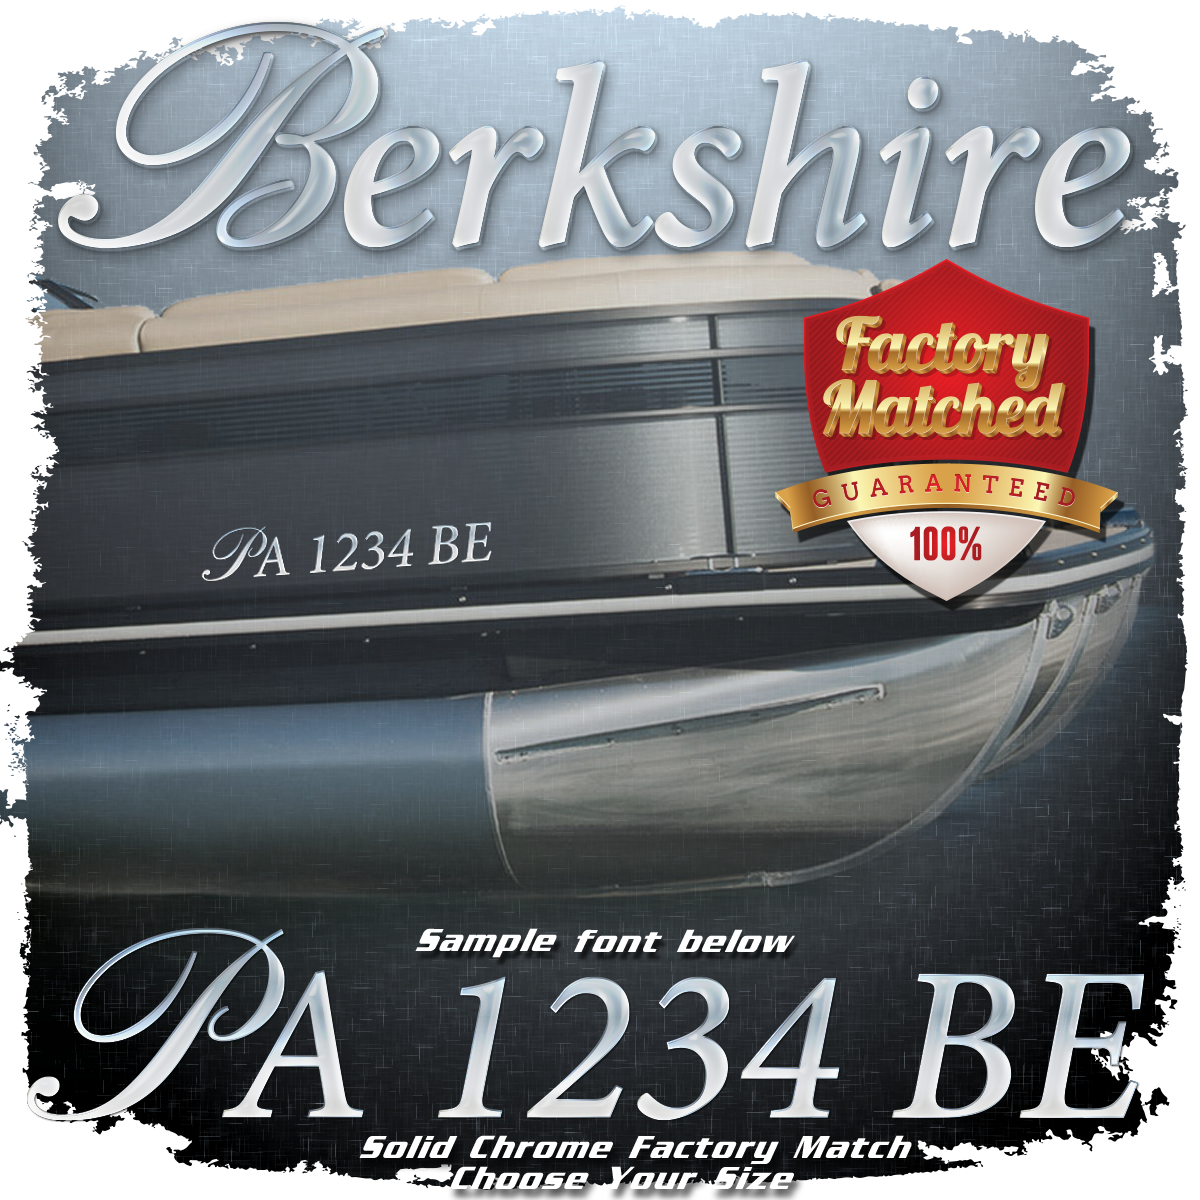 Berkshire Logo Style #1 Registration (2 included), Factory Matched Chrome